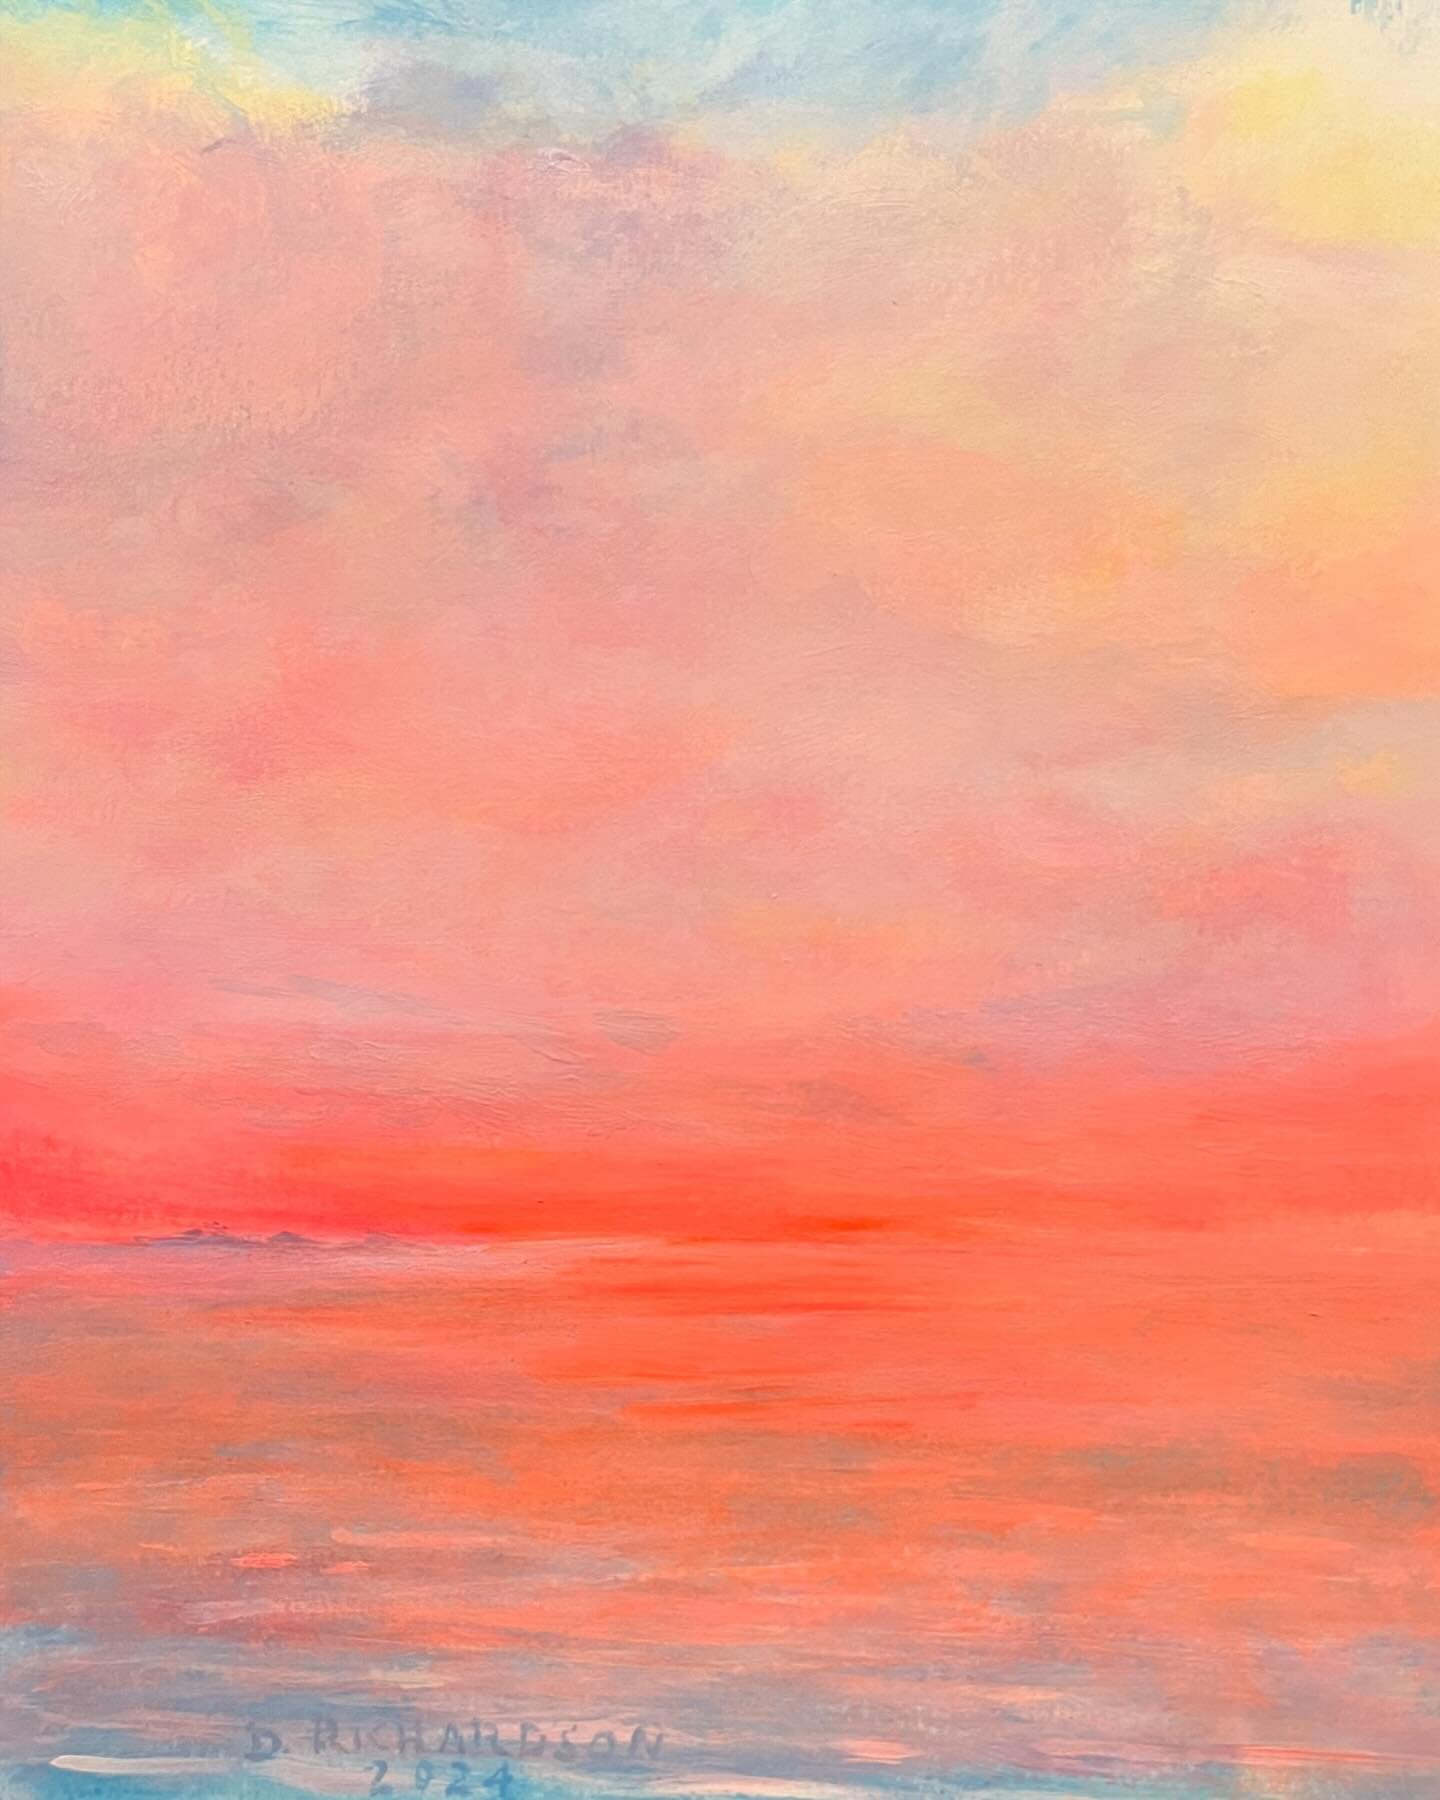 morning memory  11&rdquo; x 14&rdquo;  acrylic gouache on paper 
trying to get the feeling of sunrise - painting the early glow 
#newpainting  #sunrisesky  #coastalart  #artwork  #skypainting  #guildofcharlotteartists  #affordableart  #seacoast  #acr